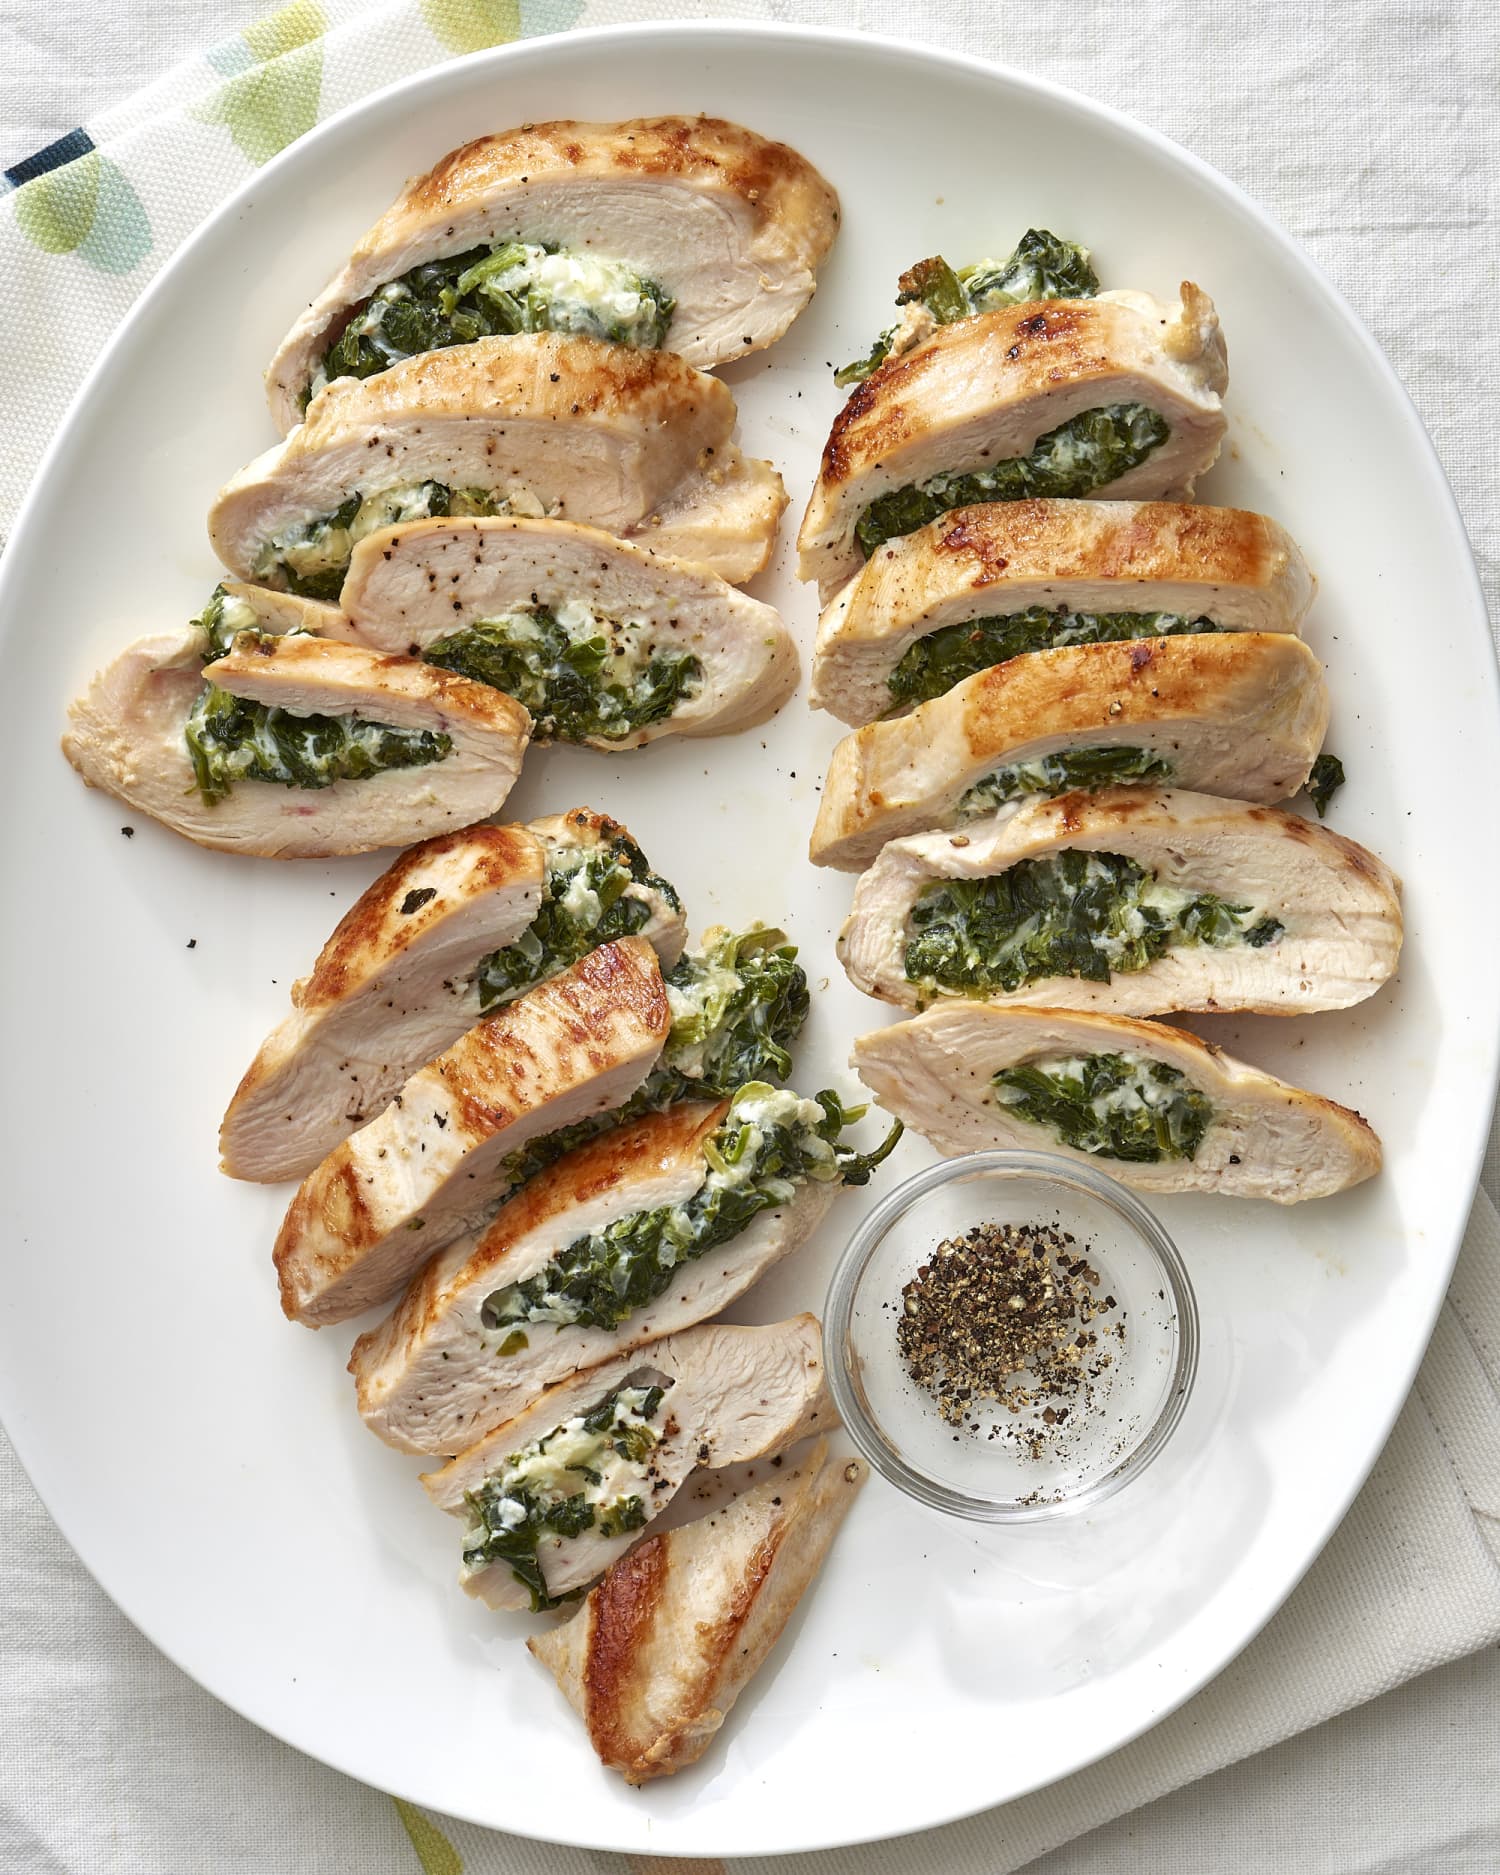 How To Make Stuffed Chicken Breast with Spinach & Cheese | Kitchn